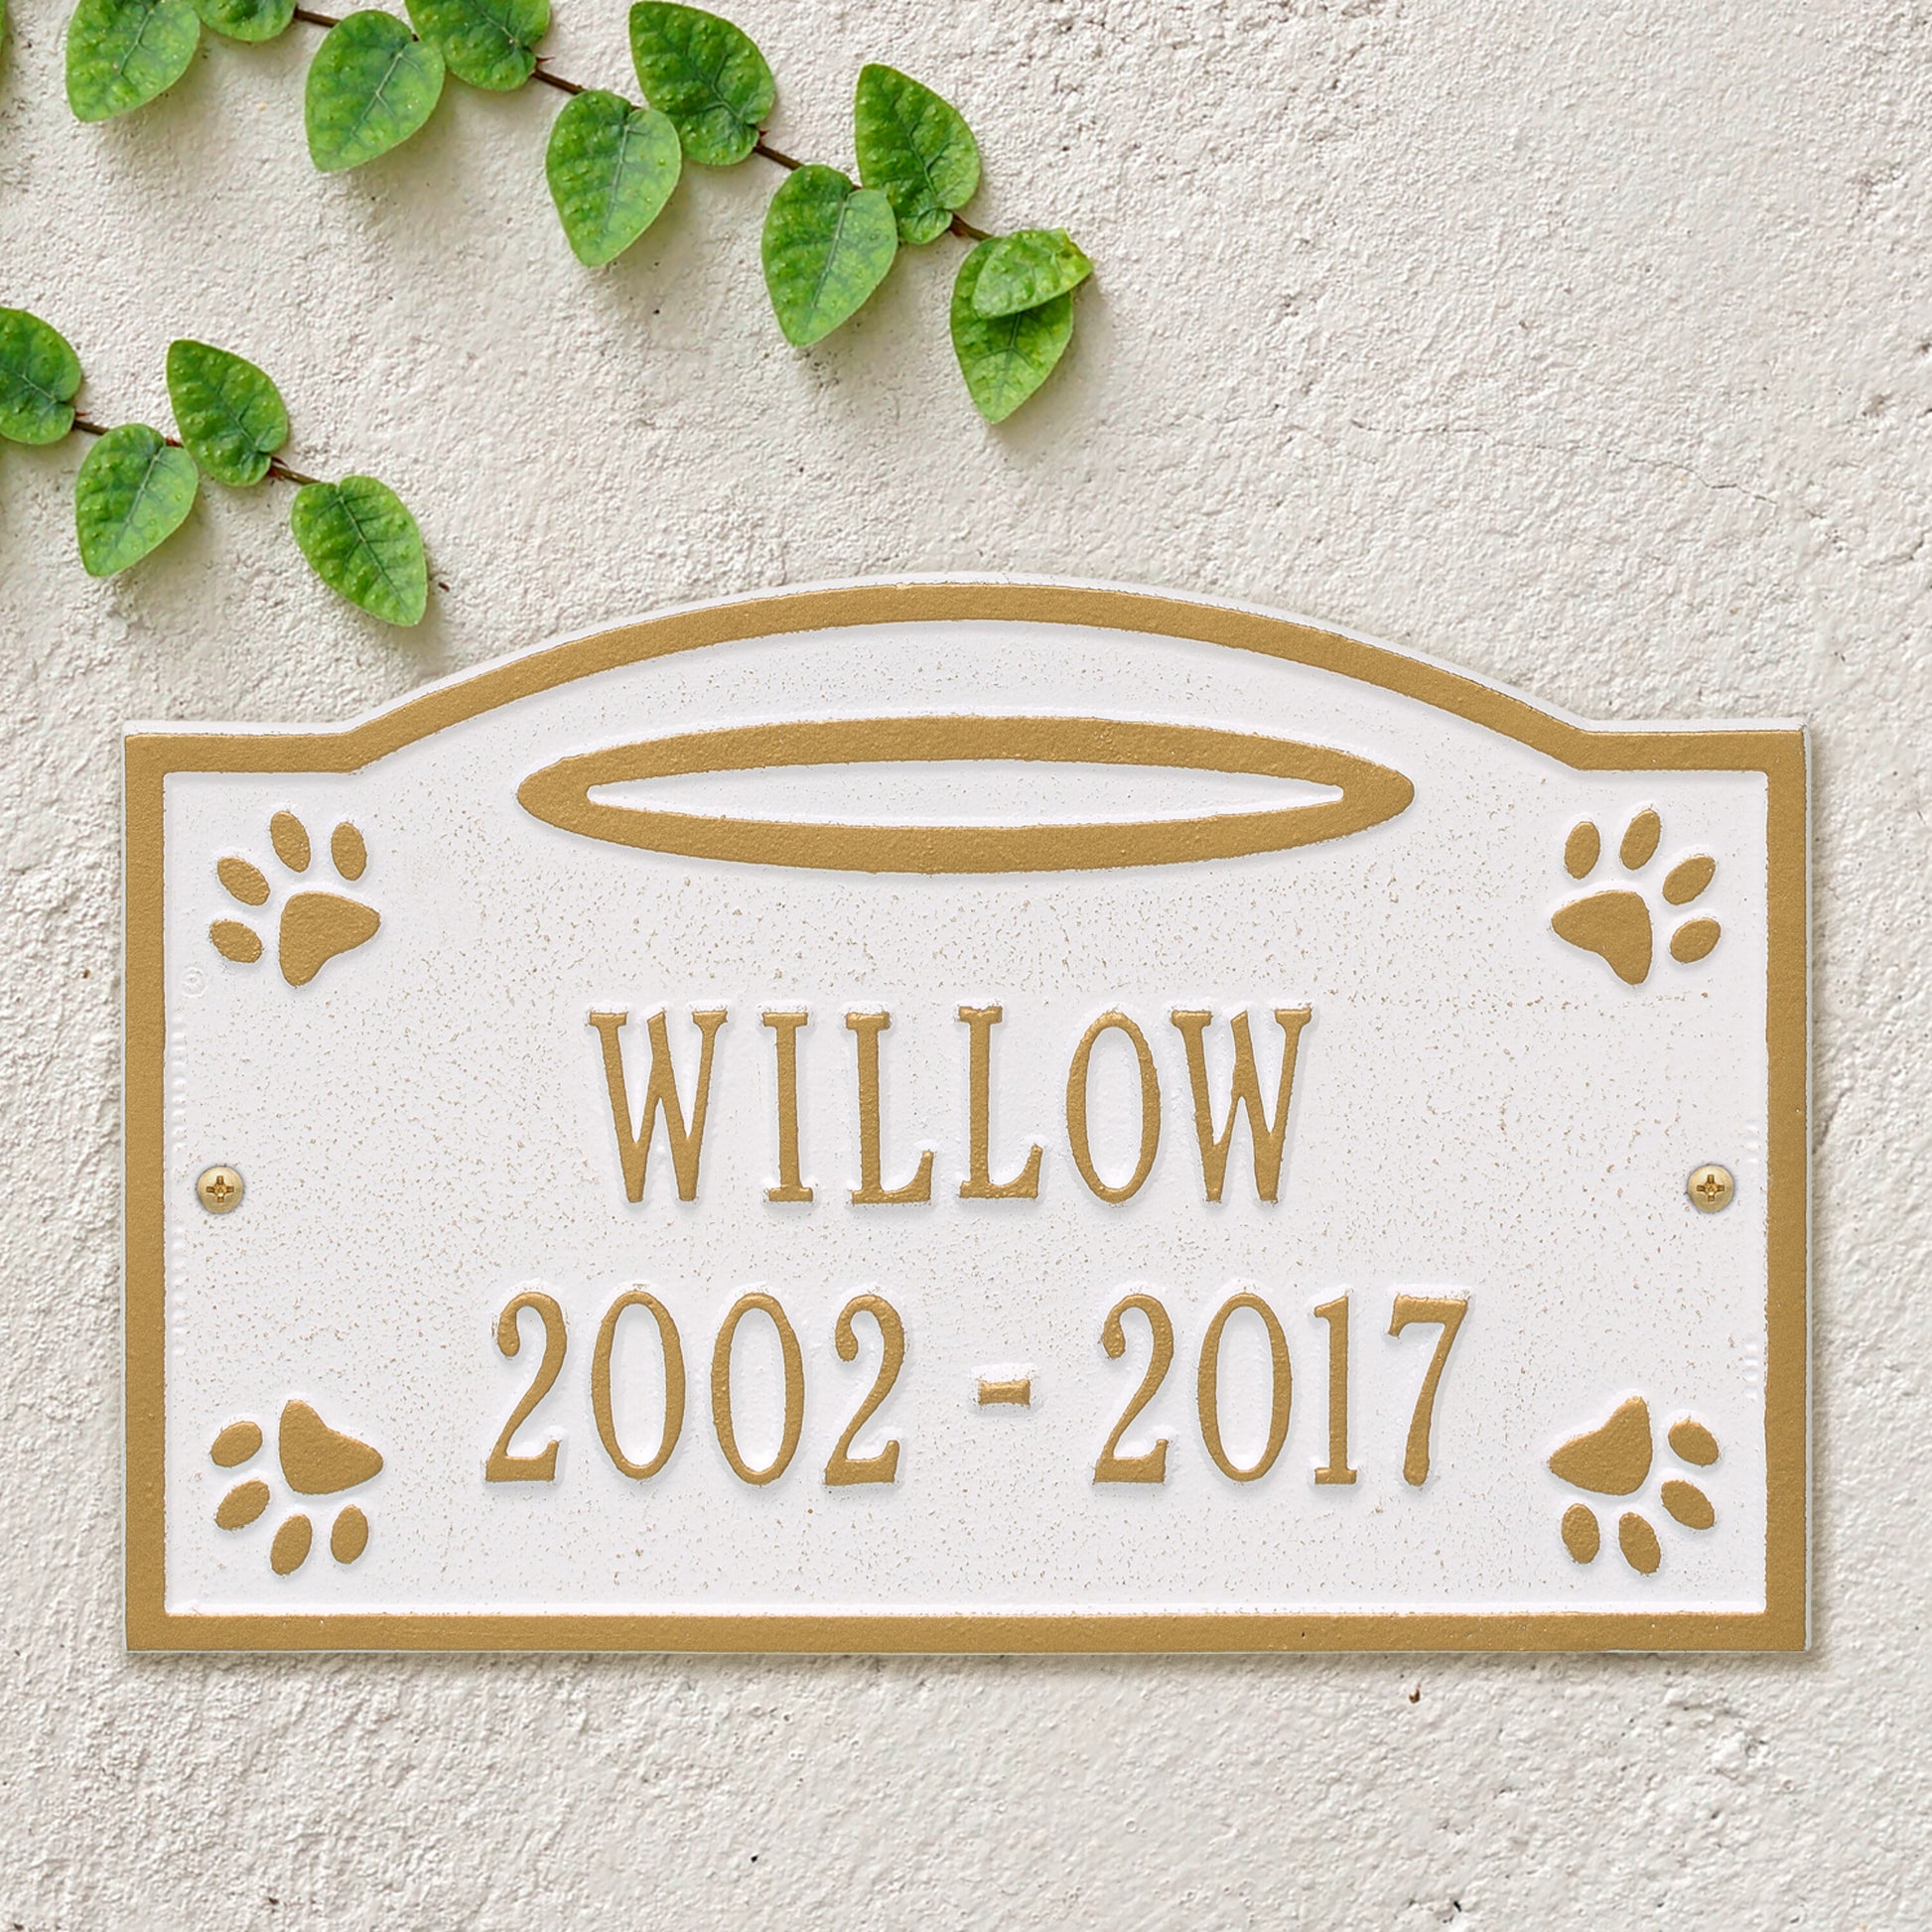 Whitehall Products Angel In Heaven Pet Memorial Personalized Wall Or Ground Plaque Two Lines Bronze Verdigris